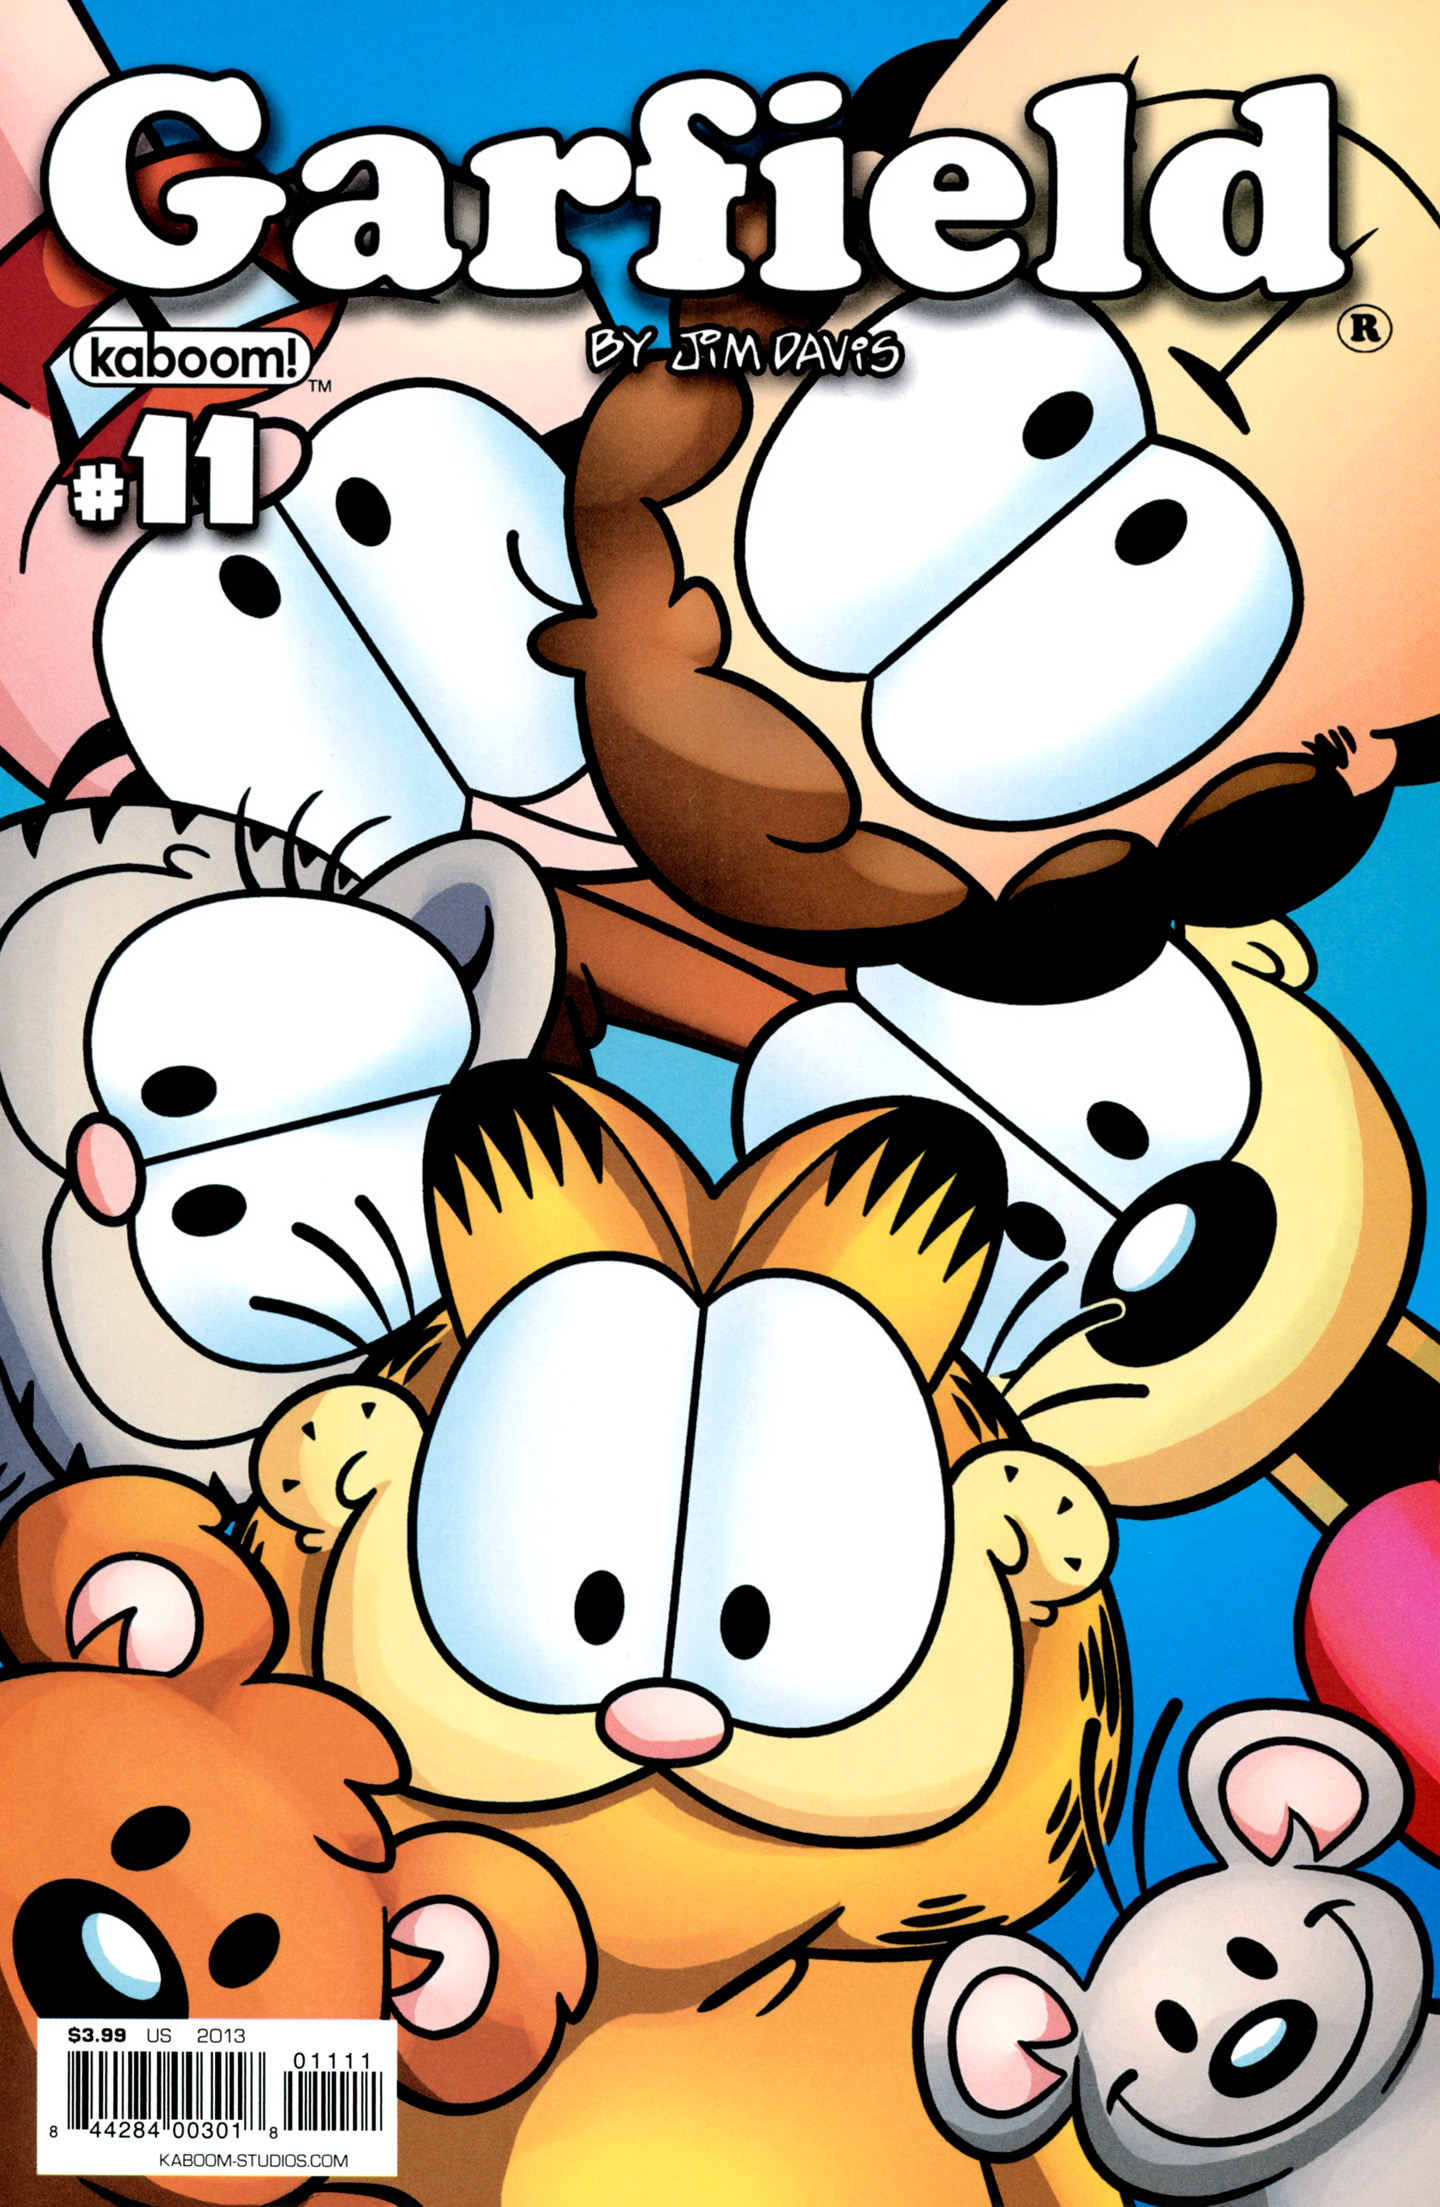 Garfield Issue 11 | Read Garfield Issue 11 comic online in high quality.  Read Full Comic online for free - Read comics online in high quality .